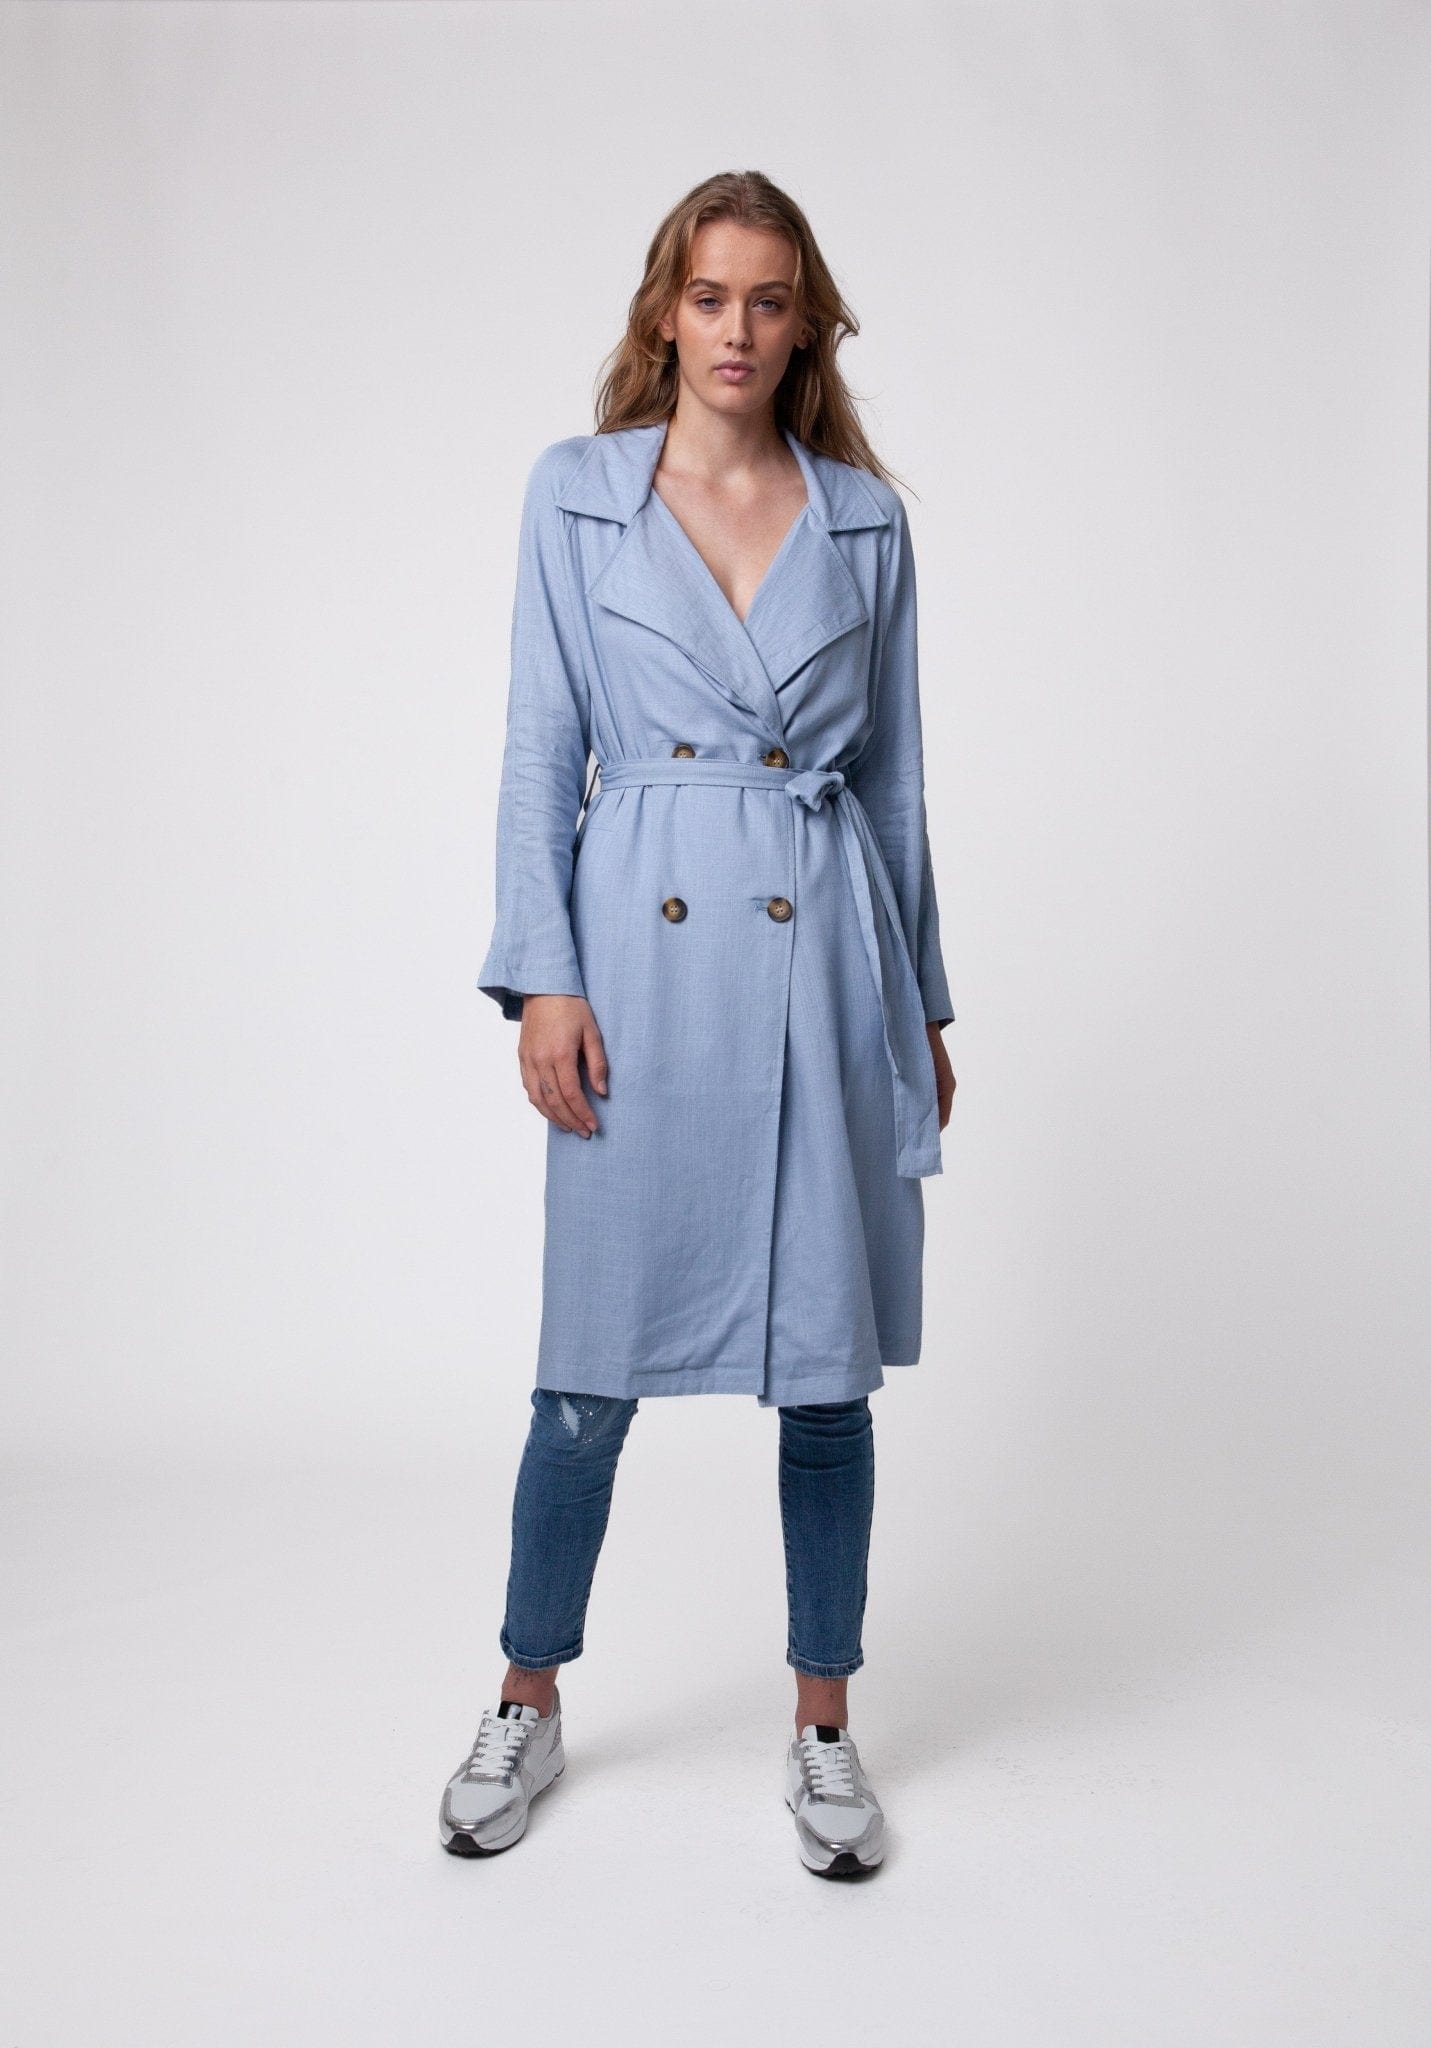 Linen Trench Style Jacket in Soft Blue - Tribute StoreTRIBUTE